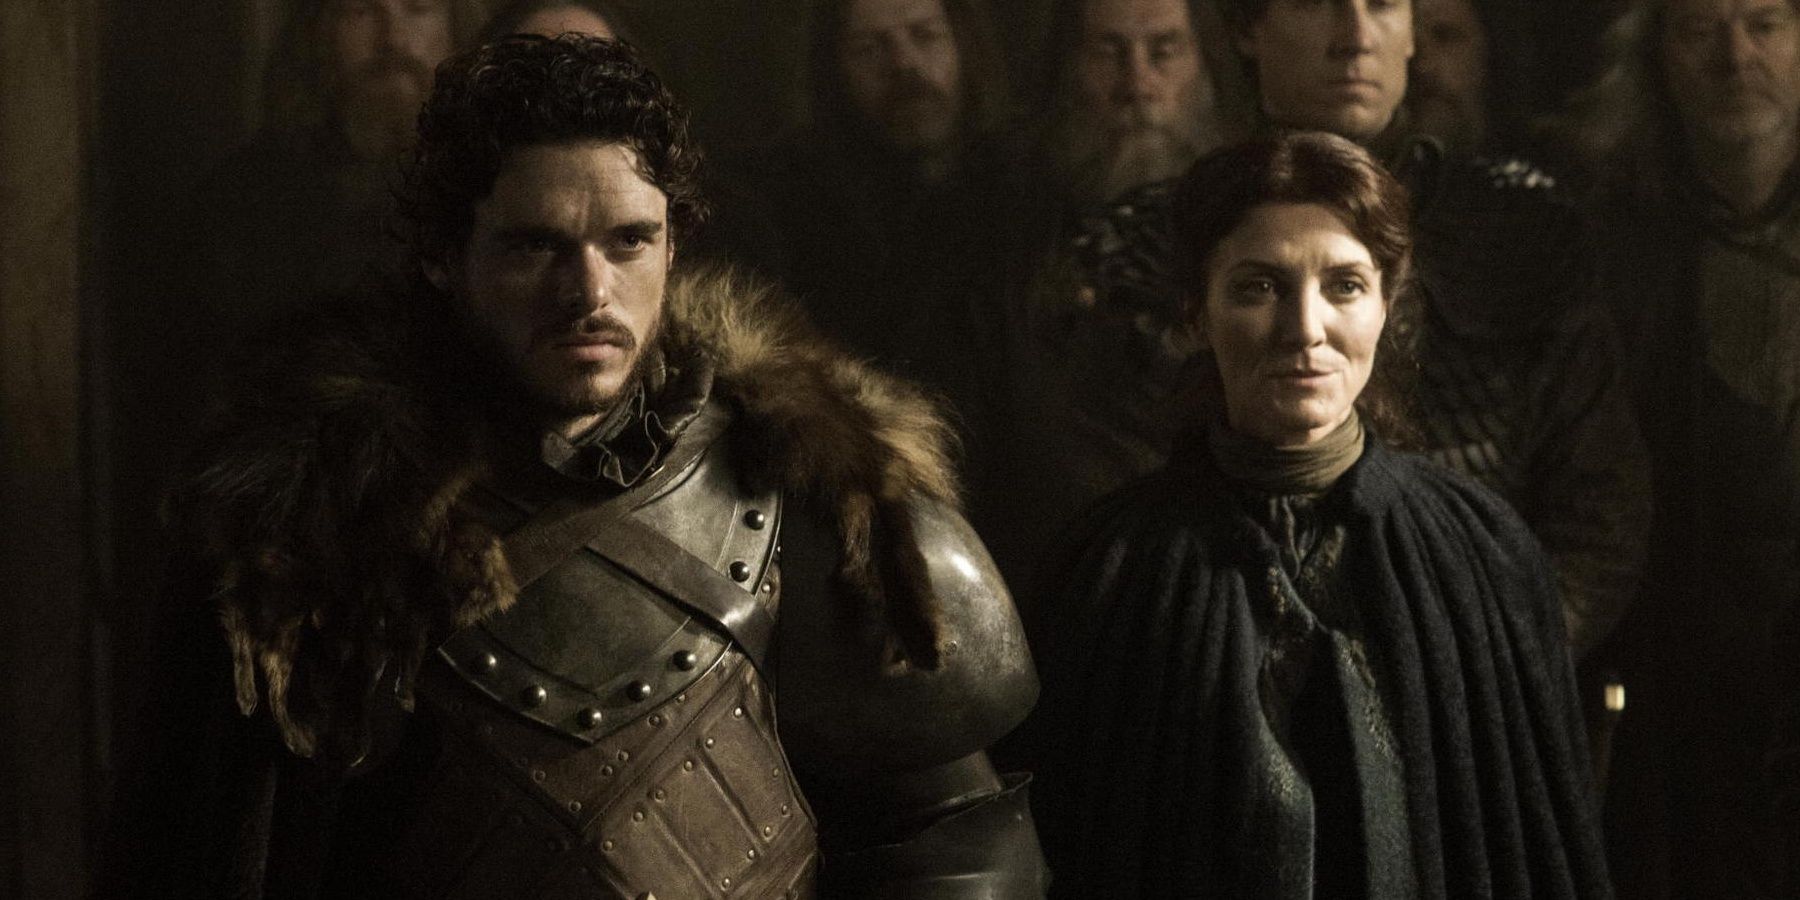 Robb Stark and Catelyn Stark stand around their people